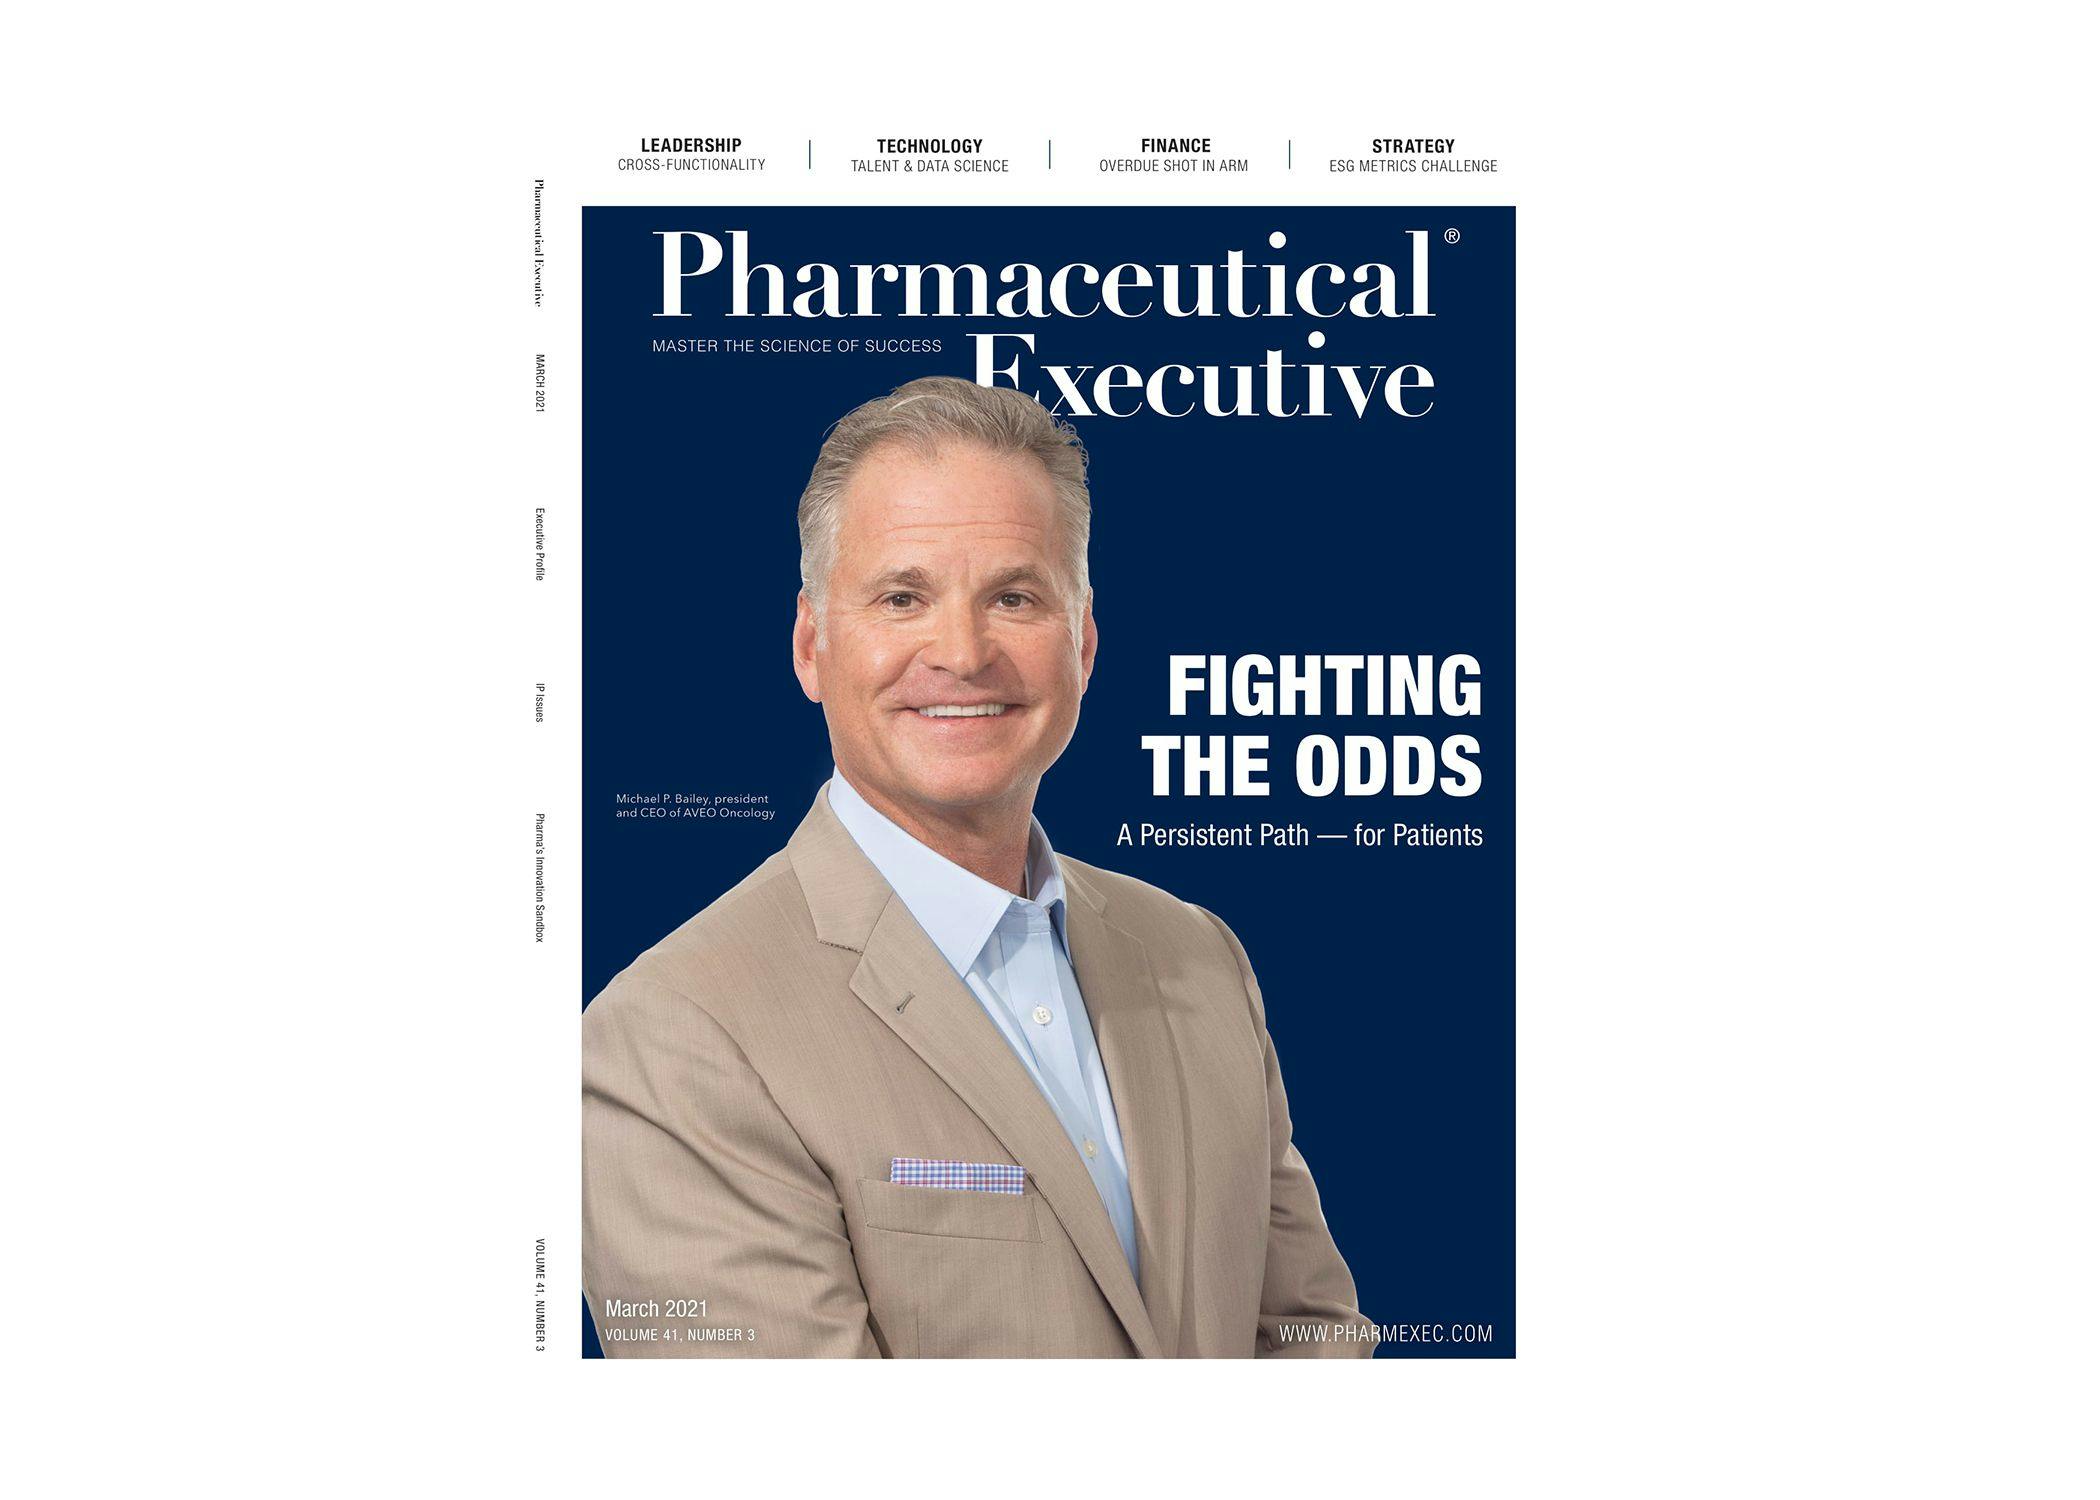 Pharmaceutical Executive, March 2021 Issue (PDF)